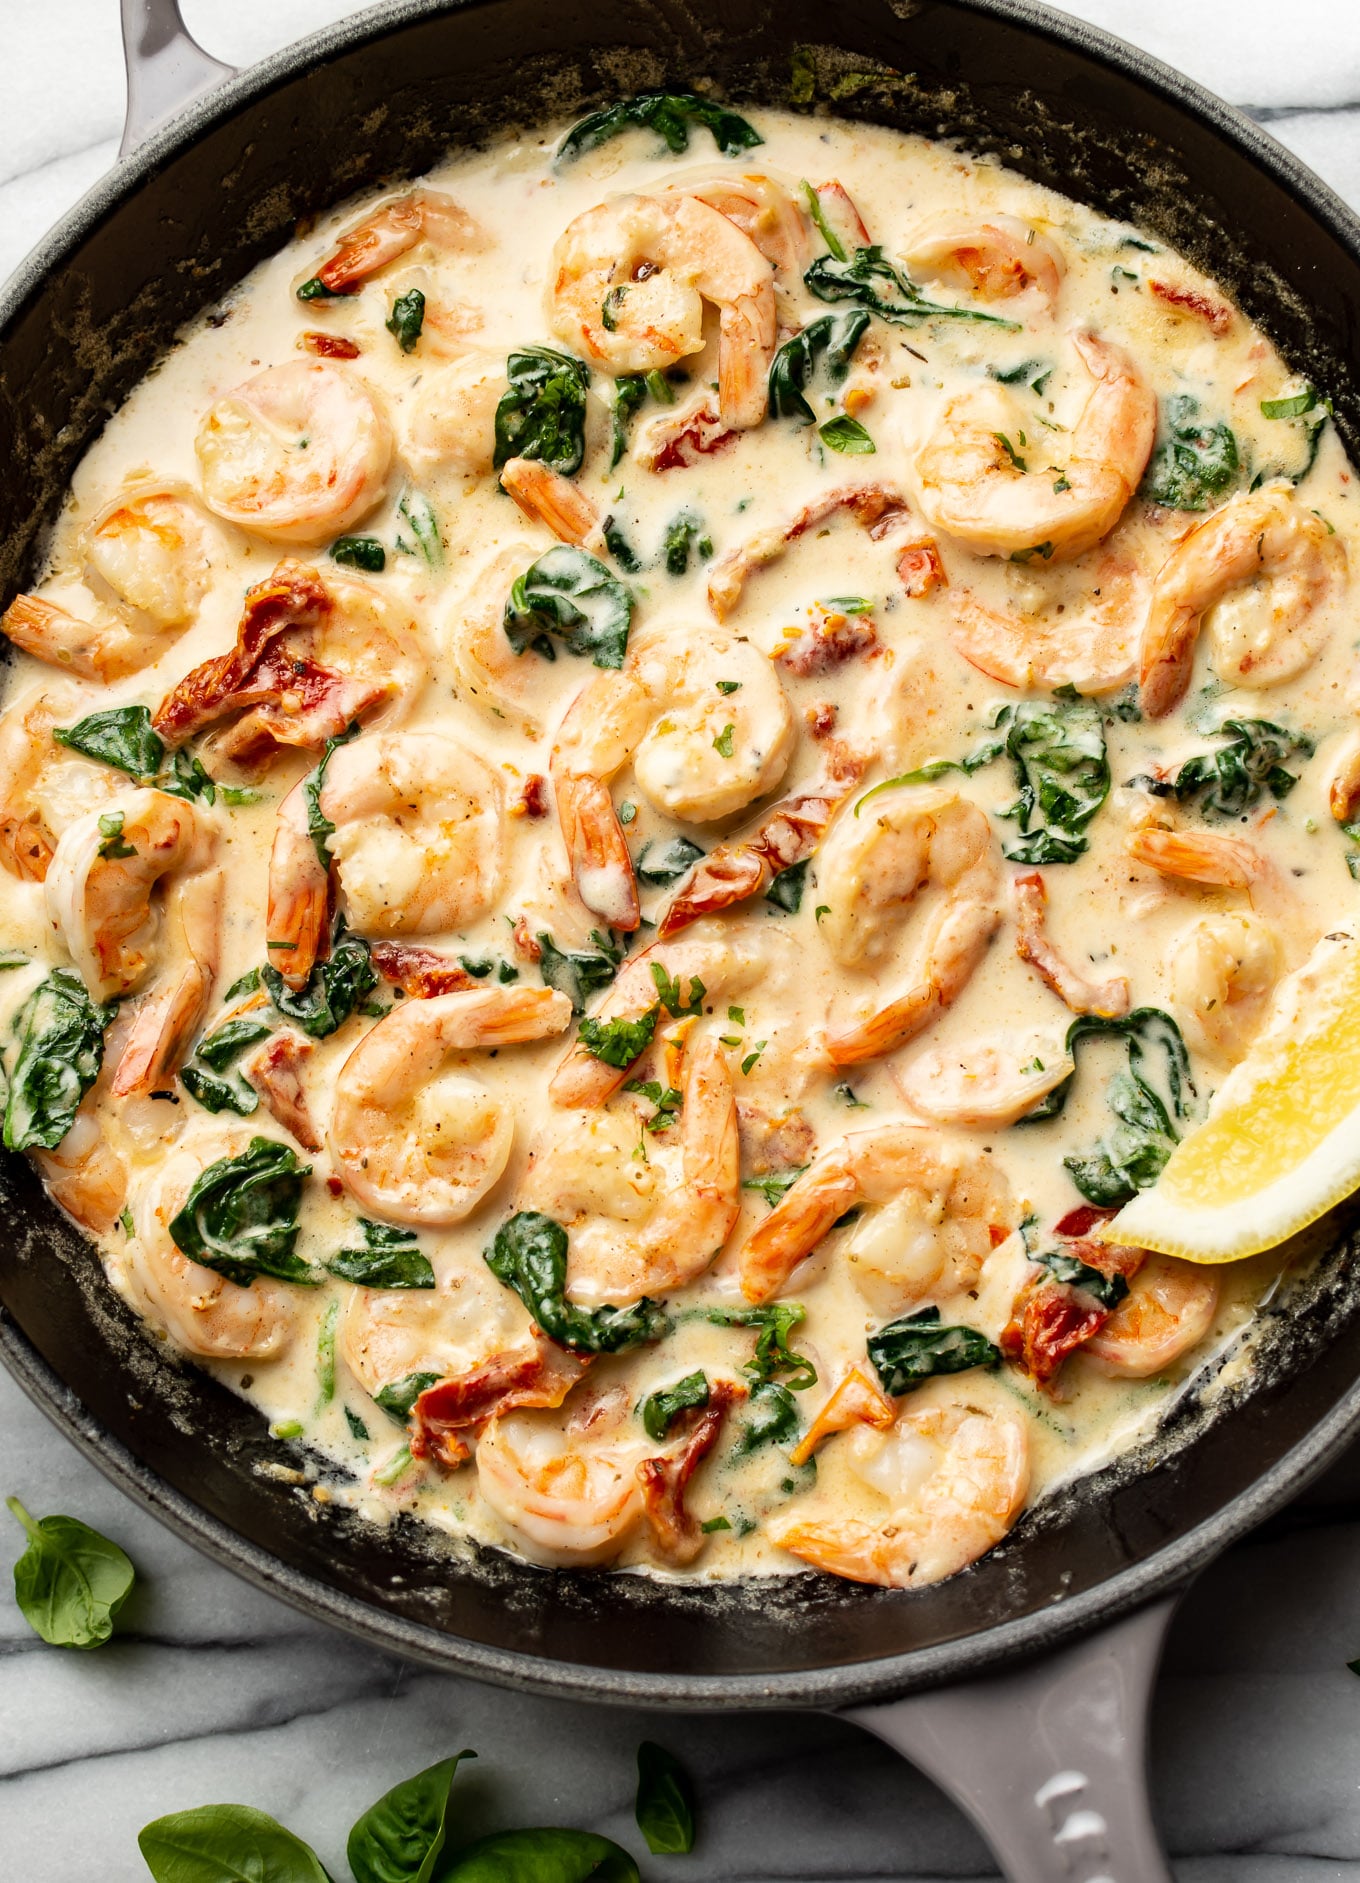 Steak and Seafood Skillet with Parmesan Cream Sauce - A Full Living